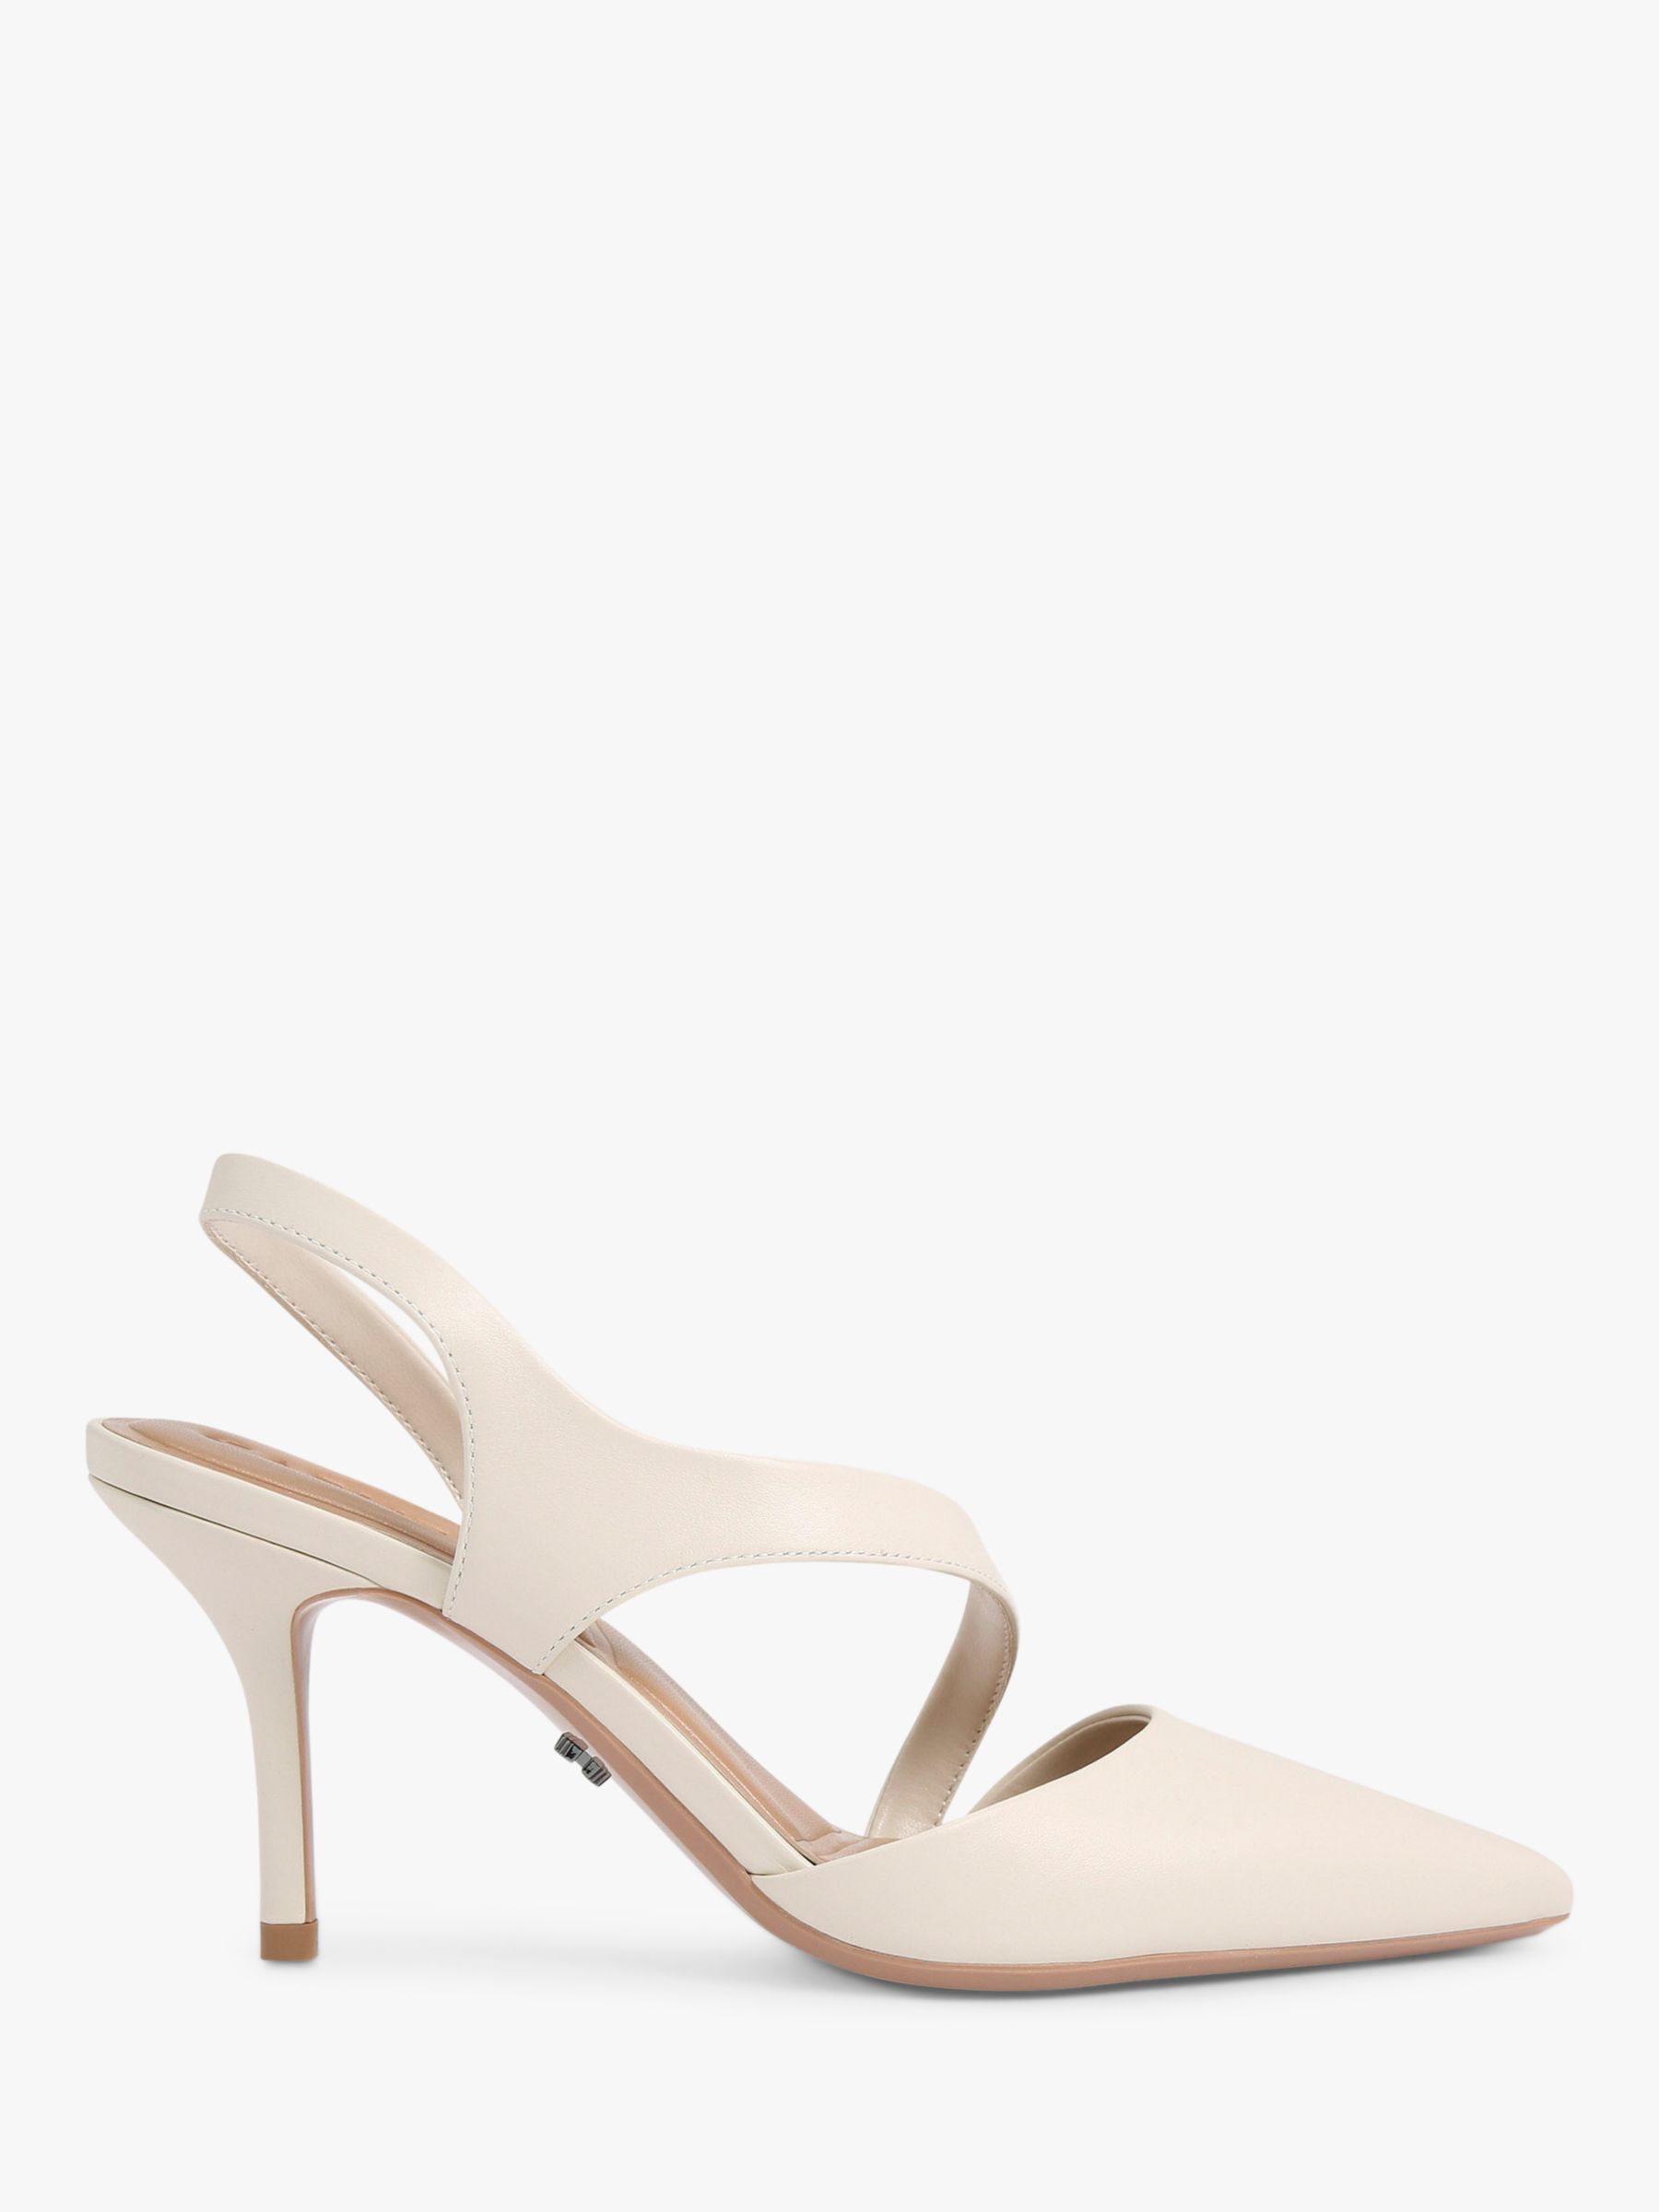 Carvela Symmetry Leather Court Shoes, Natural Putty